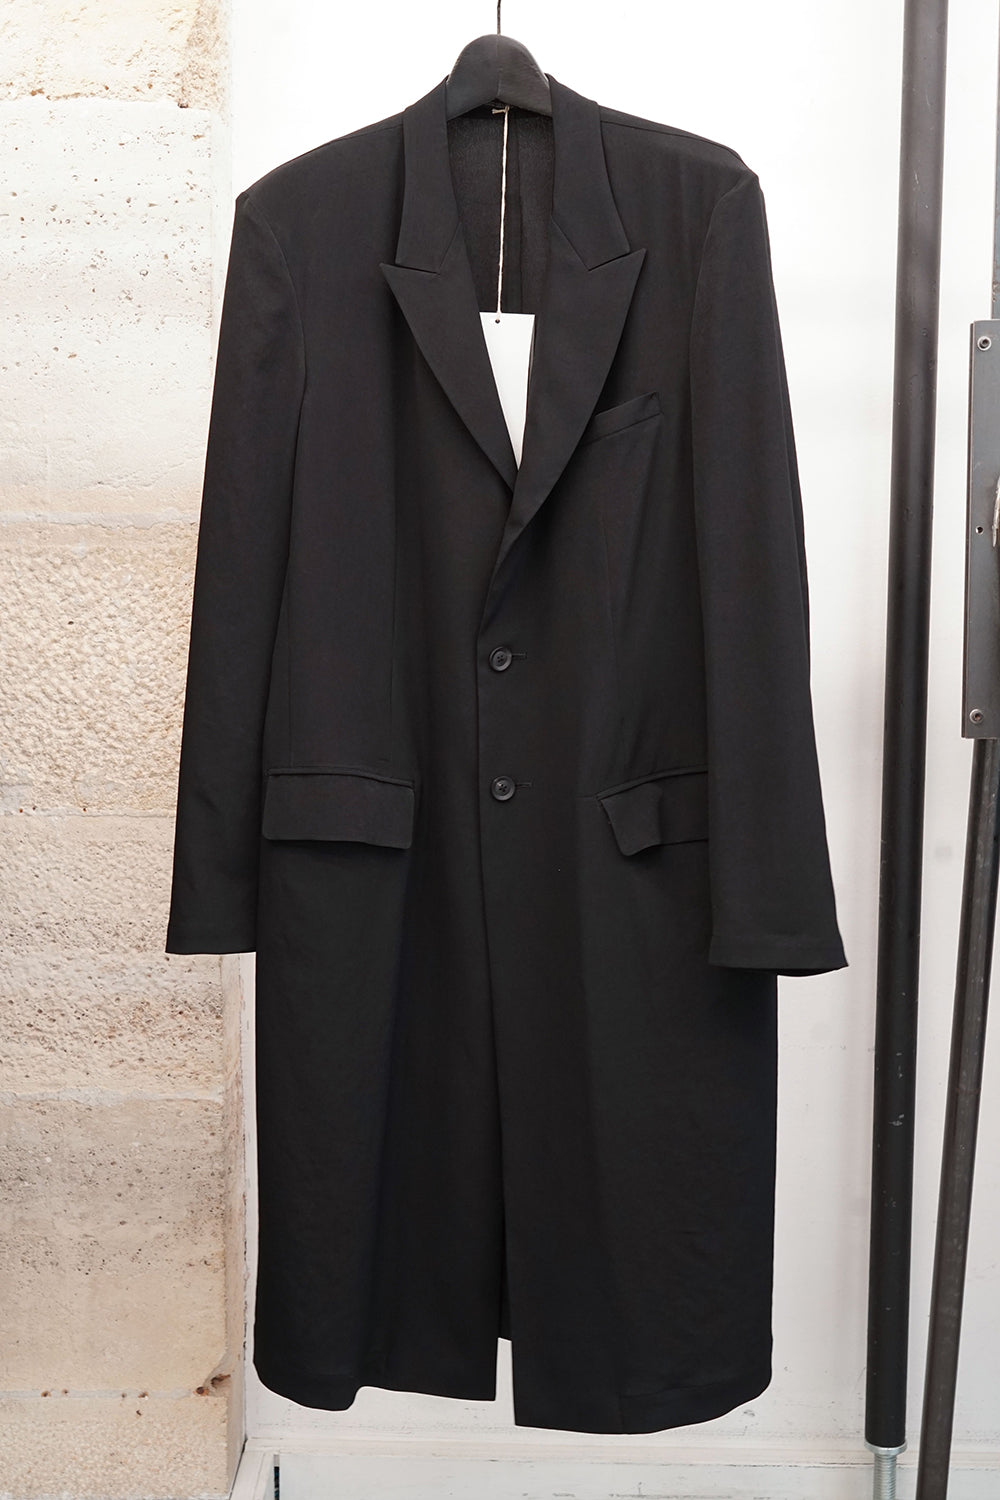 Yohji Yamamoto Pour Homme - Jacket - Online Store - FASCINATE THE 